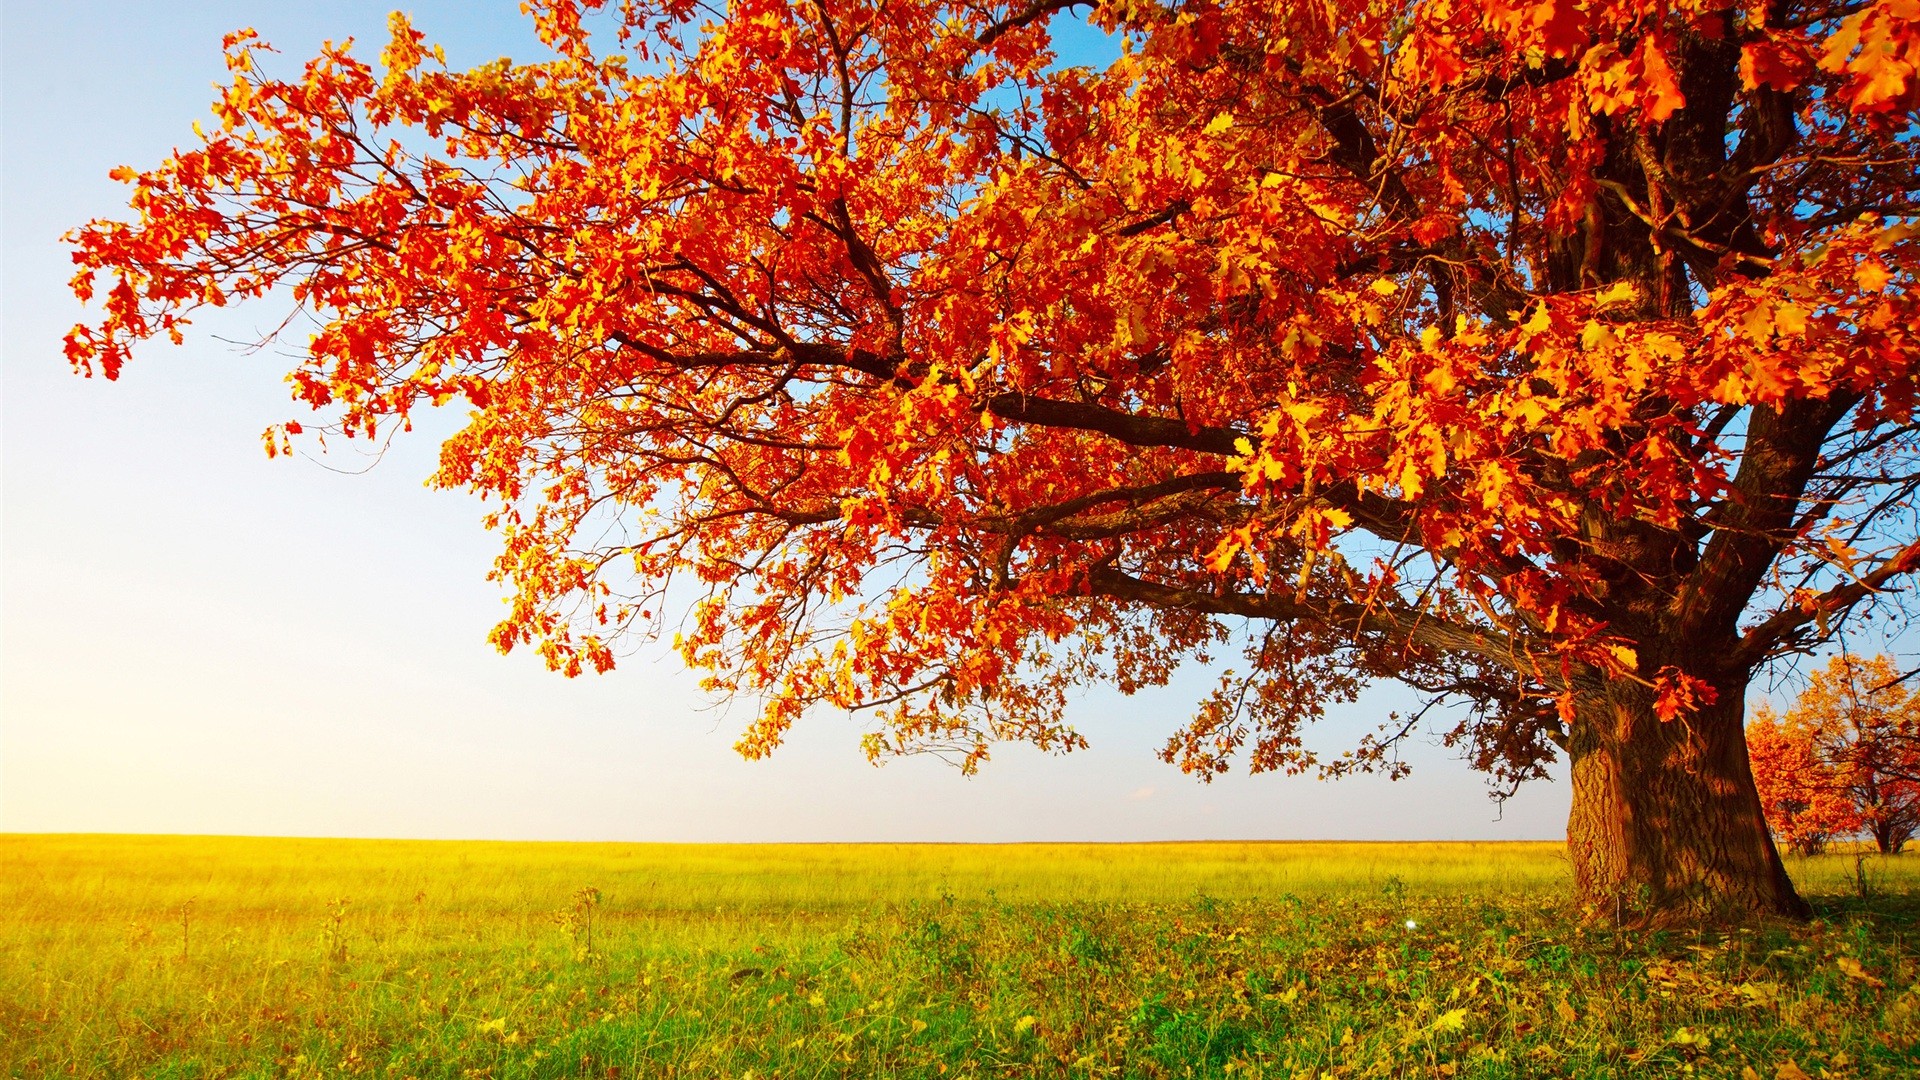 Forests: Oak Autumn Prairie Leaves Tree Red Grass Magnificent ...